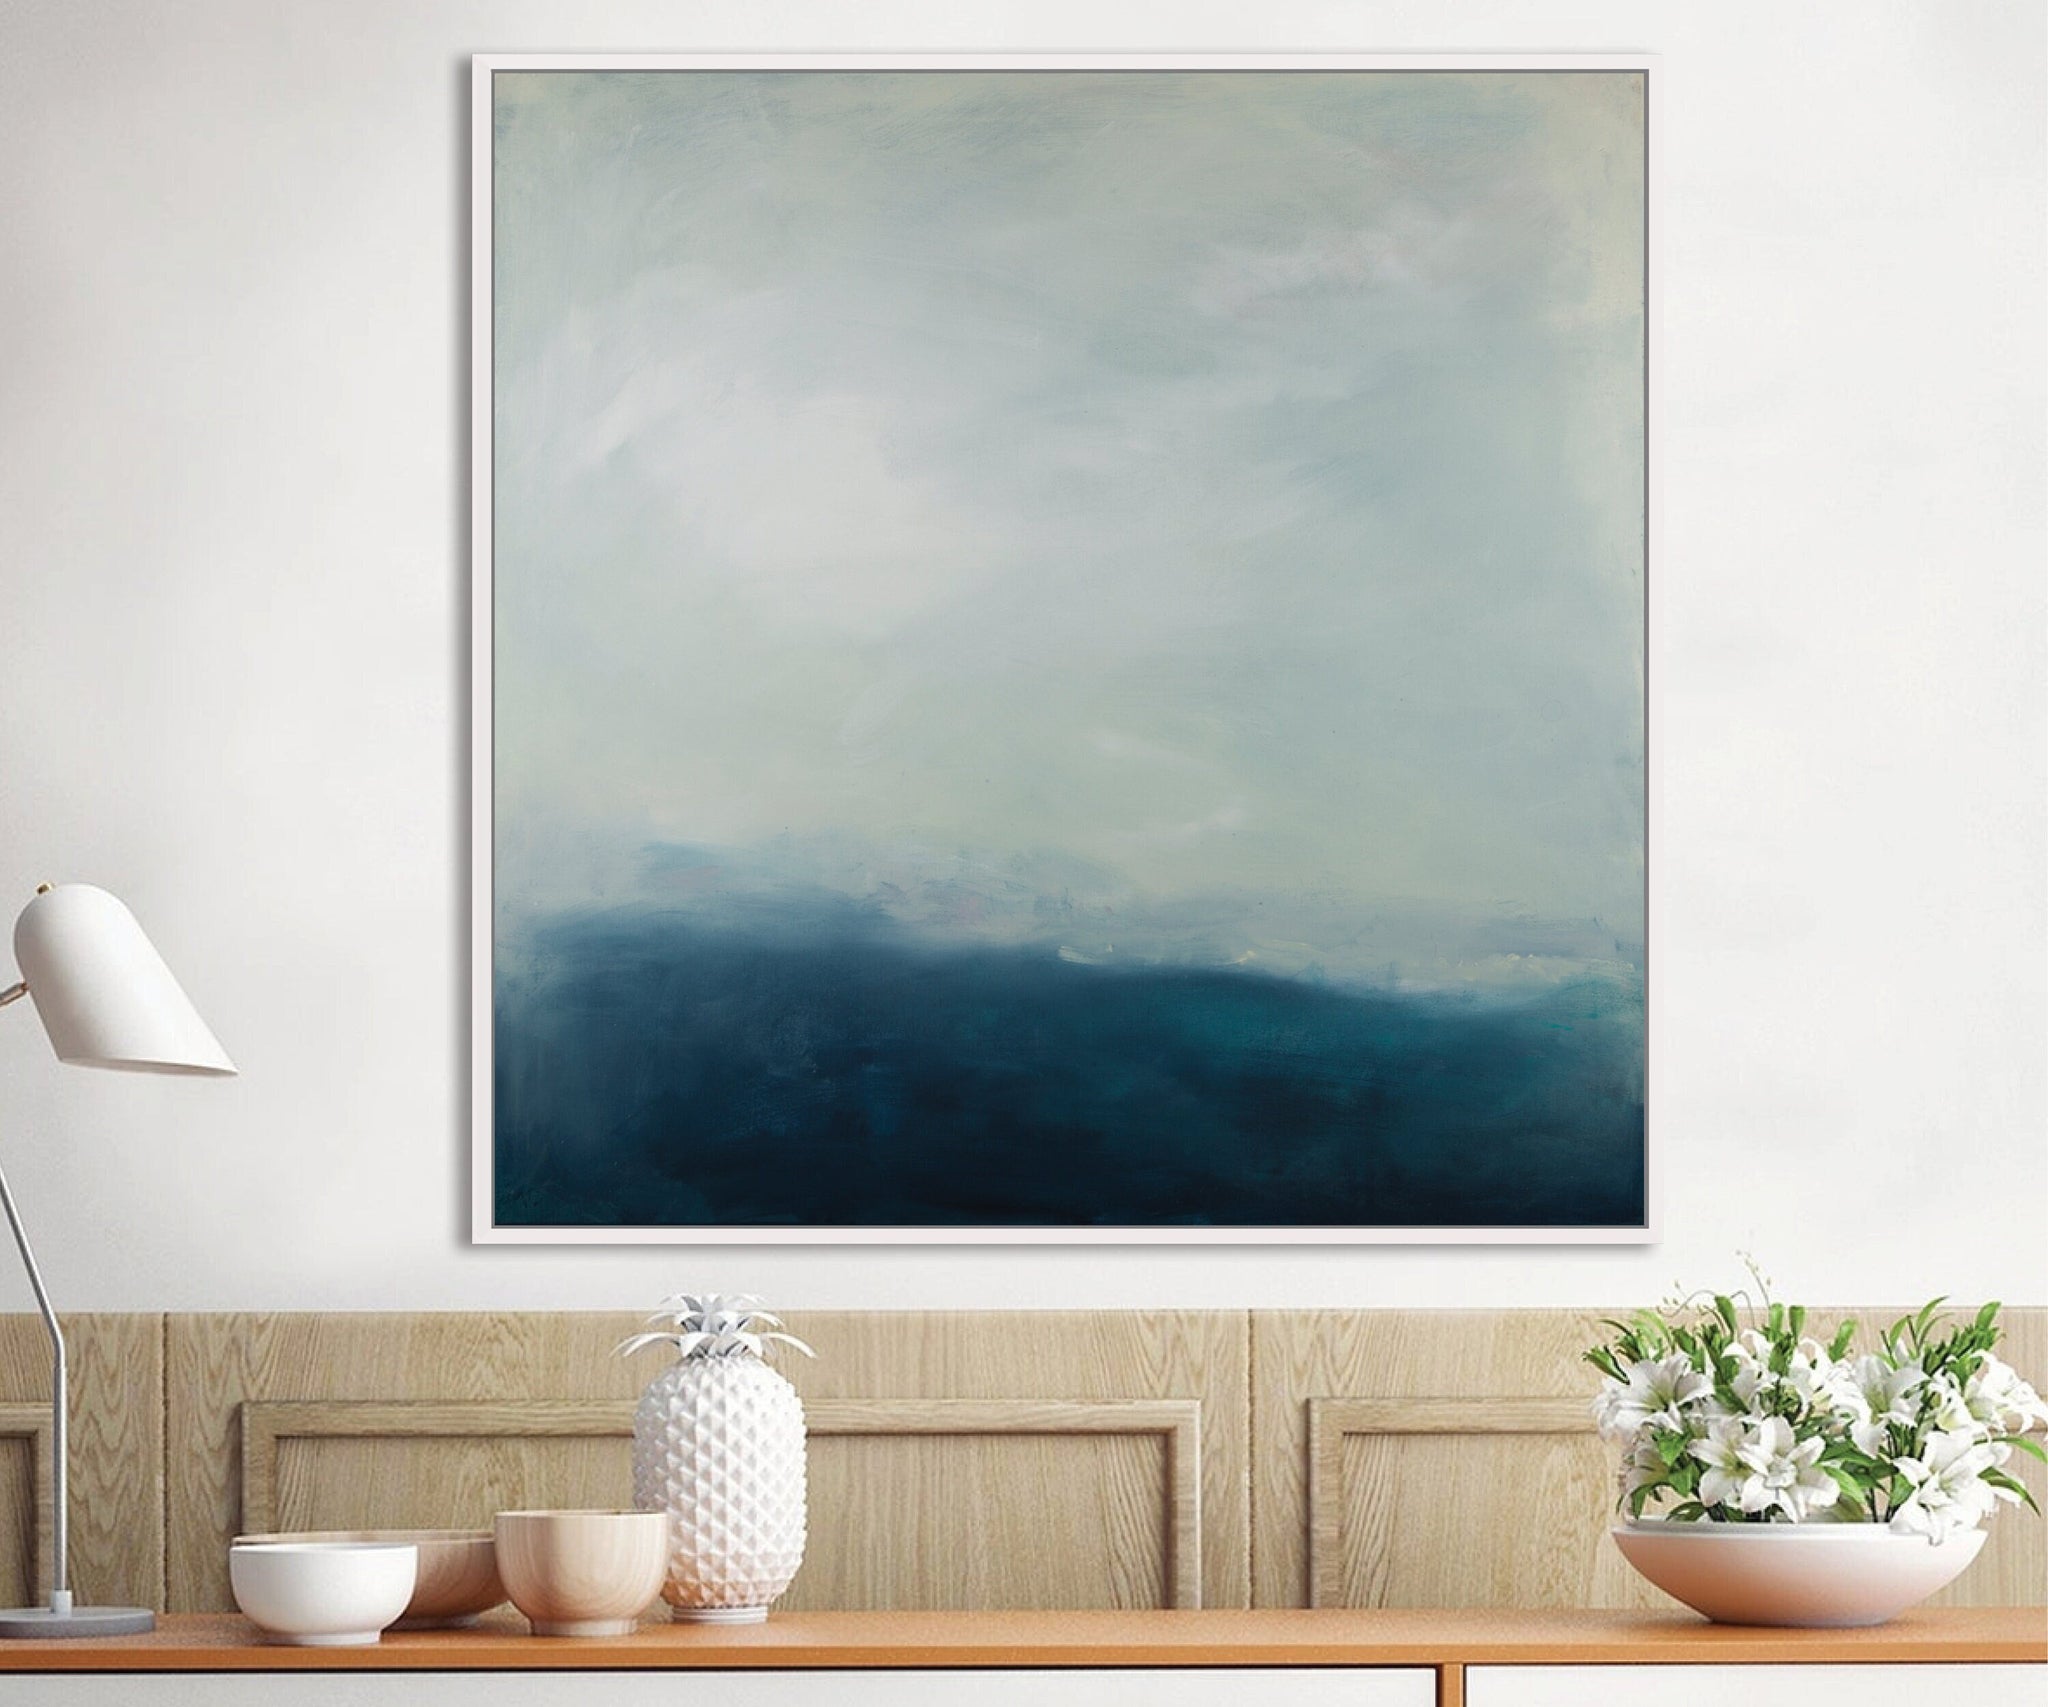 Original blue seascape abstract art painting on canvas, landscape extra large wall art, Original ocean painting